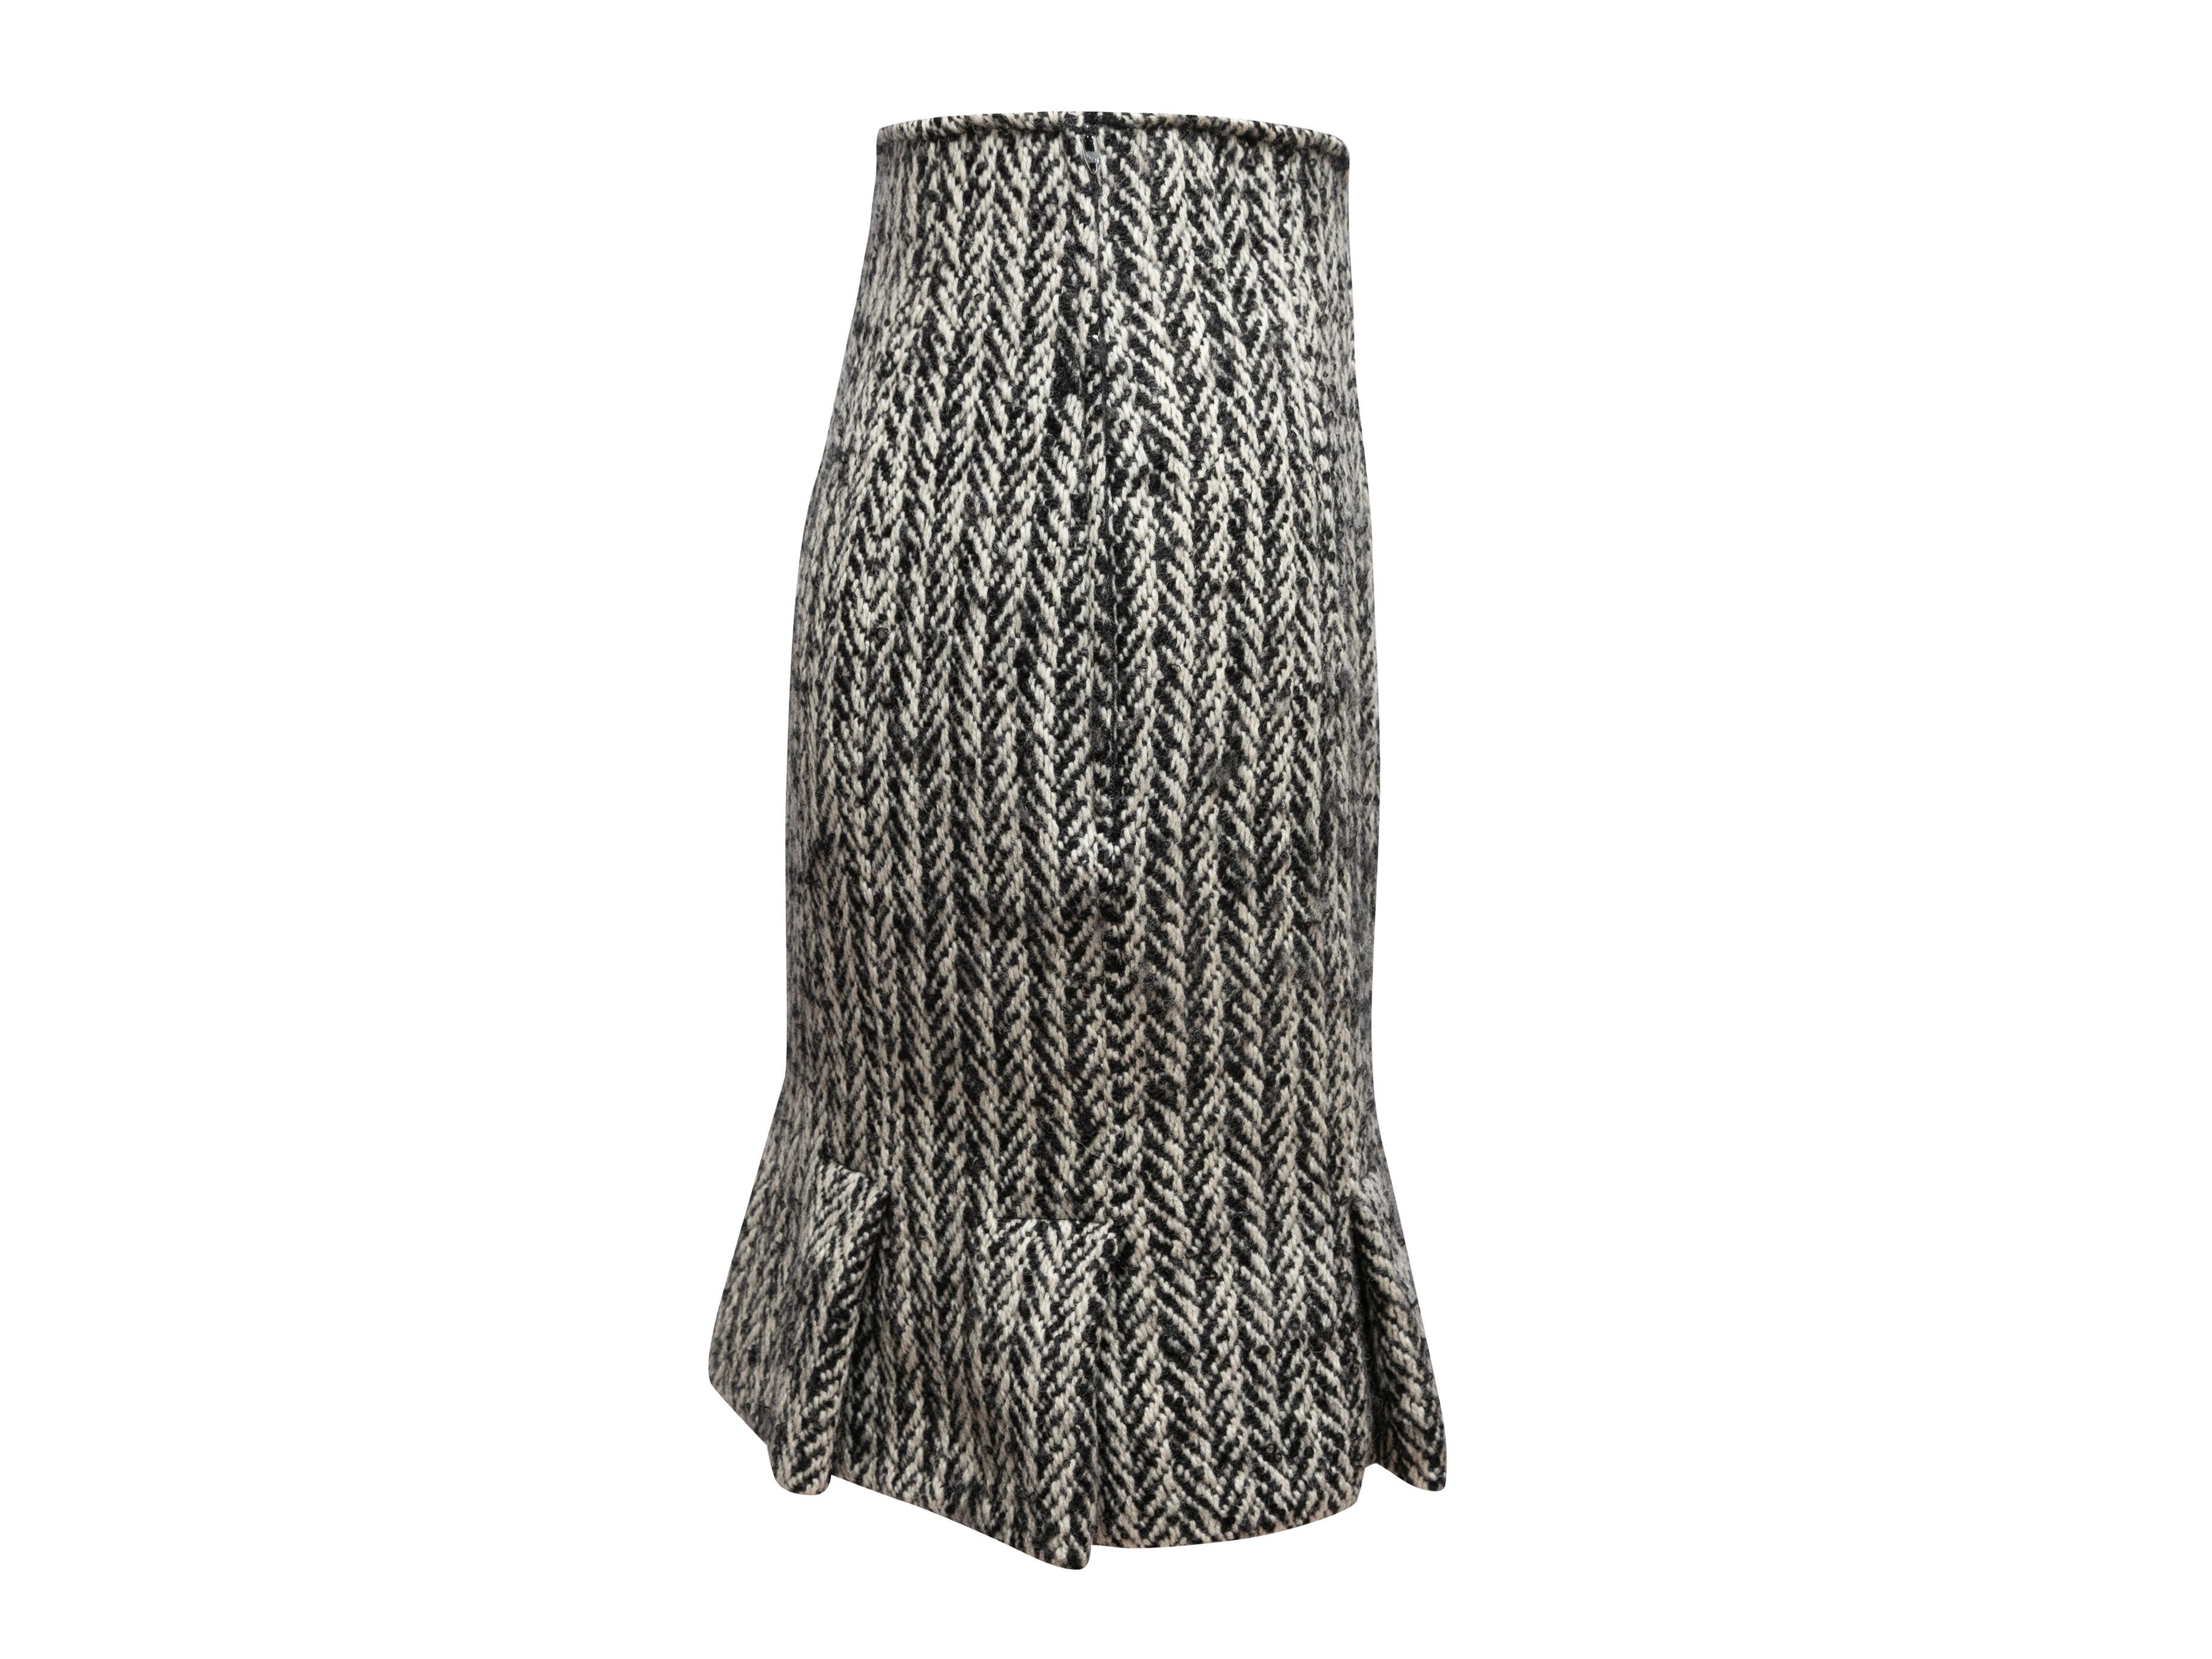 Vintage Black & White Calvin Klein Herringbone Wool Skirt Size US 6 In Good Condition For Sale In New York, NY